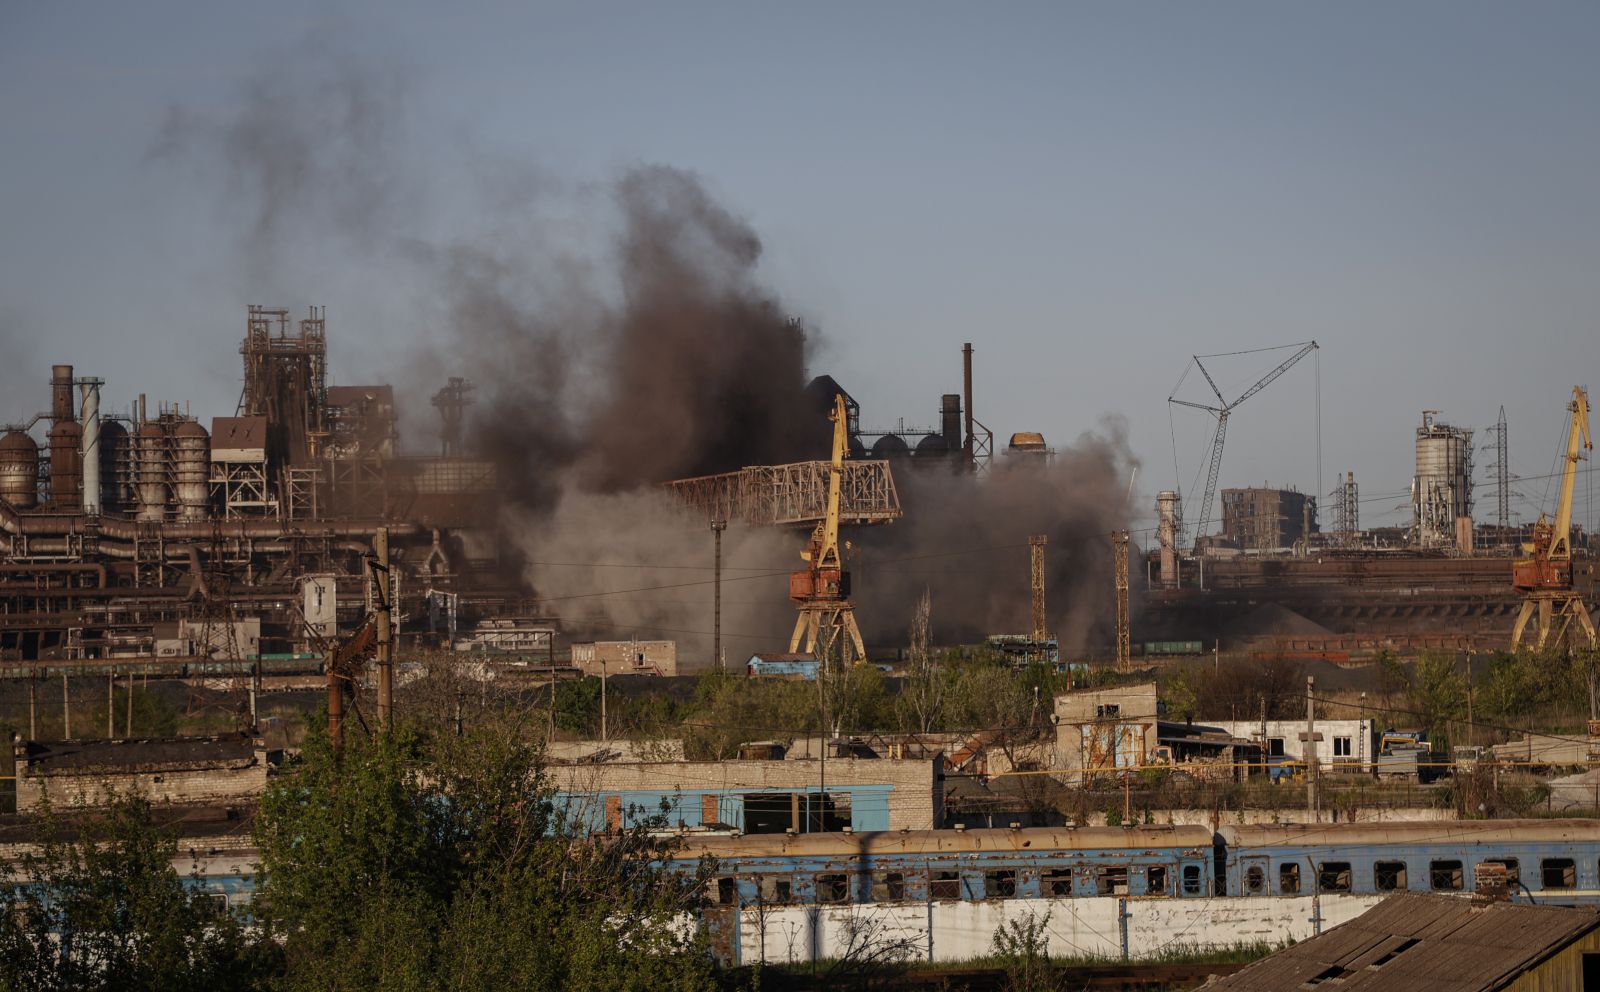 epa09932618 Smoke rises over Azovstal steel plant in Mariupol, Ukraine, 07 May 2022. According to the Interdepartmental Coordinating Headquarters of the Russian Federation for Humanitarian Response, 51 civilians, including 11 children, were evacuated from the Azovstal plant between 05 and 07 May. On 24 February, Russian troops had entered Ukrainian territory in what the Russian president declared a 'special military operation', resulting in fighting and destruction in the country. According to data released by the United Nations High Commission for the Refugees (UNHCR) on 05 May, over 5.7 million refugees have fled Ukraine seeking safety, protection and assistance in neighboring countries.  EPA/ALESSANDRO GUERRA